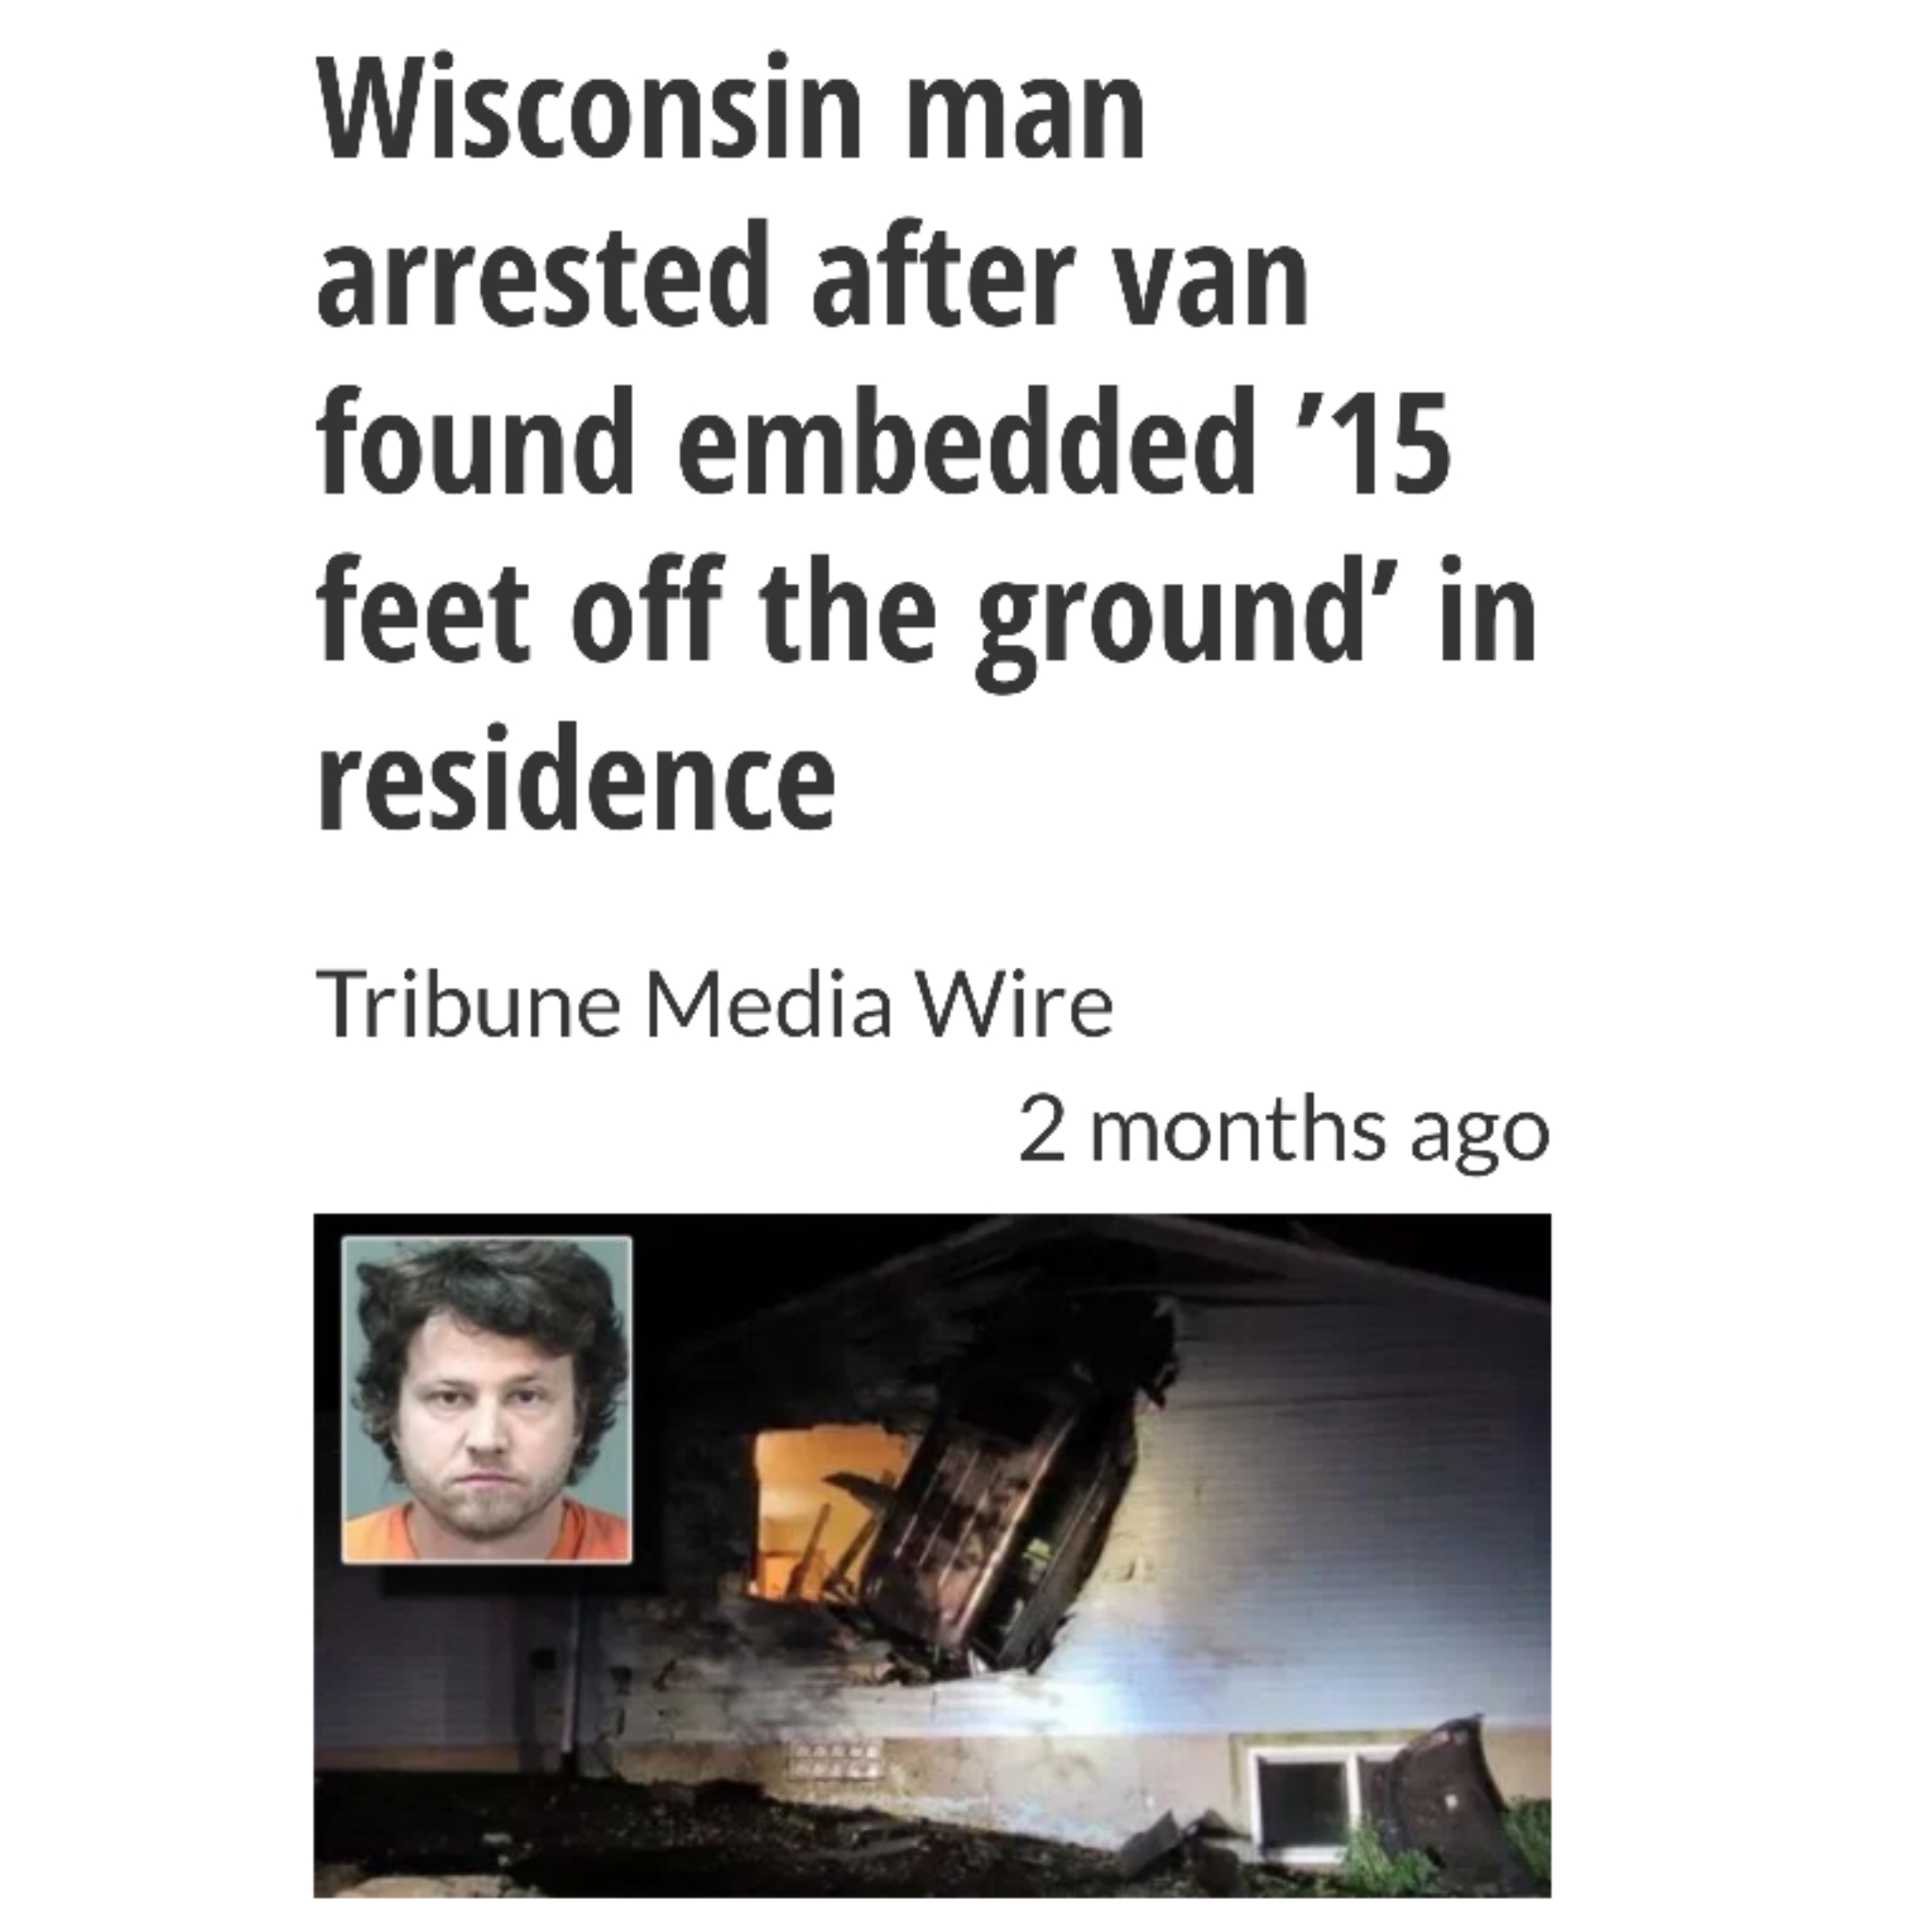 media - Wisconsin man arrested after van found embedded '15 feet off the ground' in residence Tribune Media Wire 2 months ago